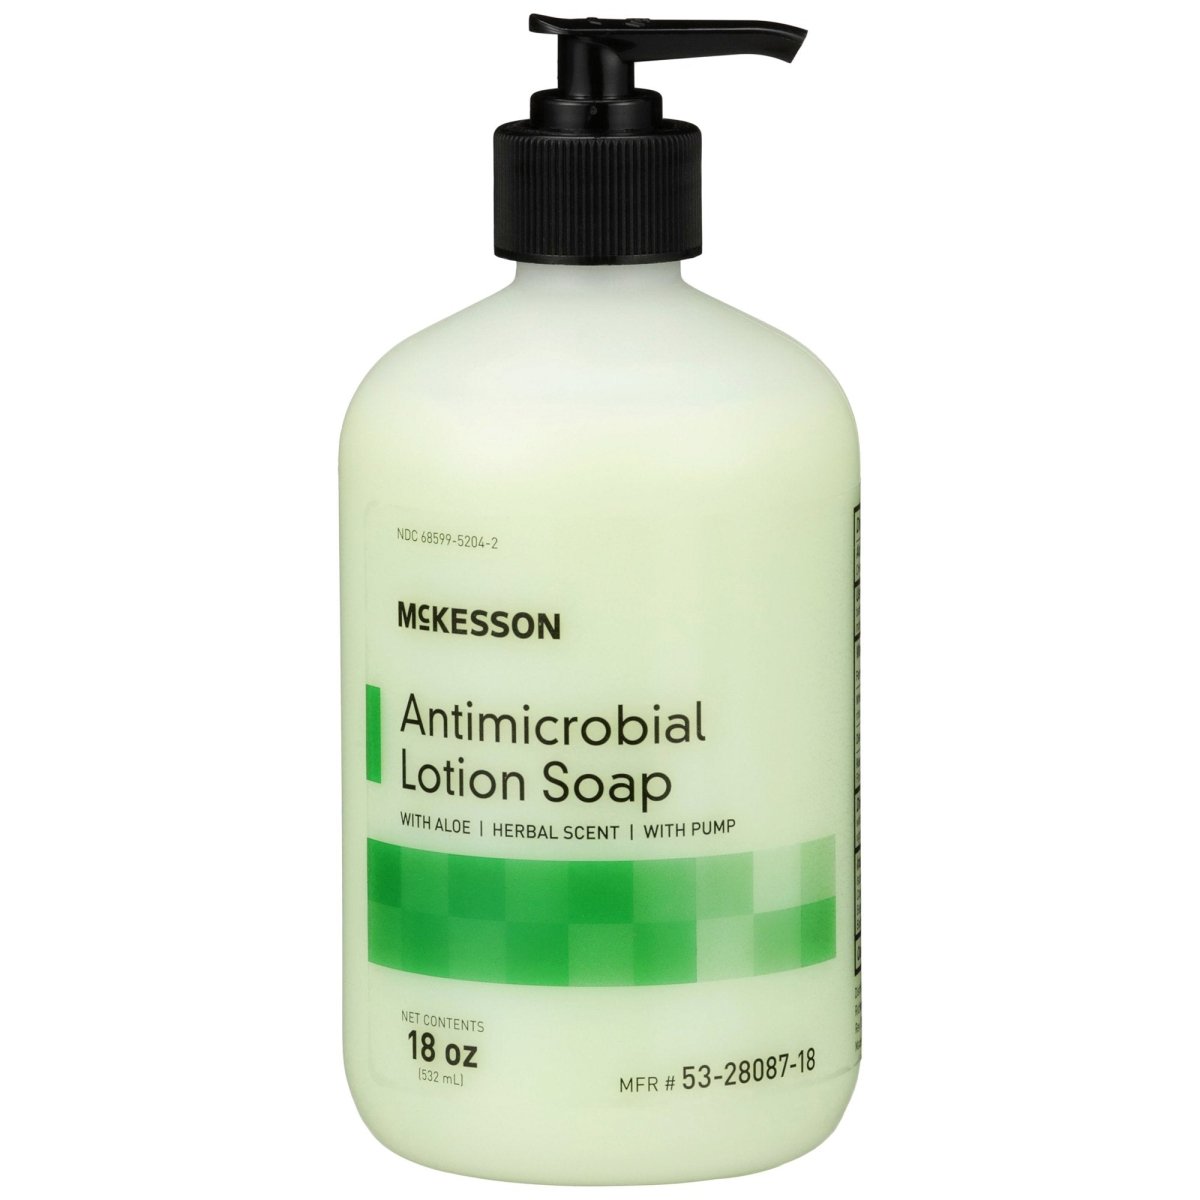 McKesson Antimicrobial Lotion Soap, Herbal Scent, 18 oz, Pump Bottle, Green, 0.95% Strength - 937908_EA - 2